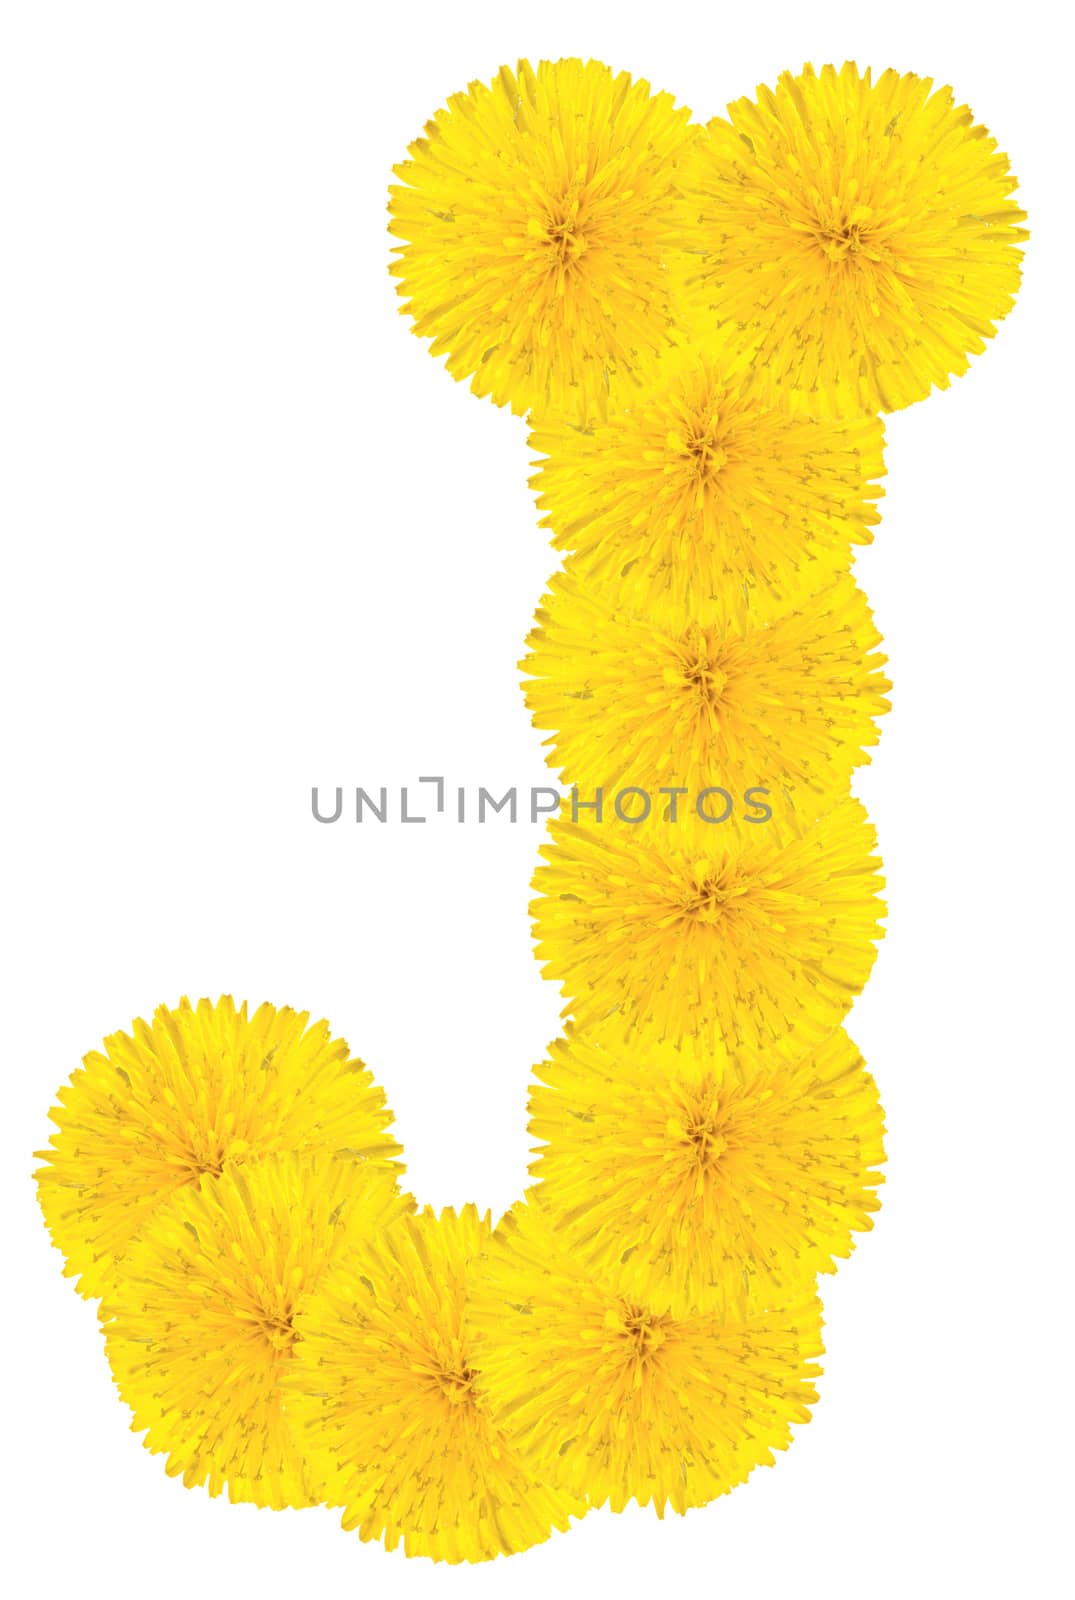 Letter J made from dandelion flowers isolated on white background